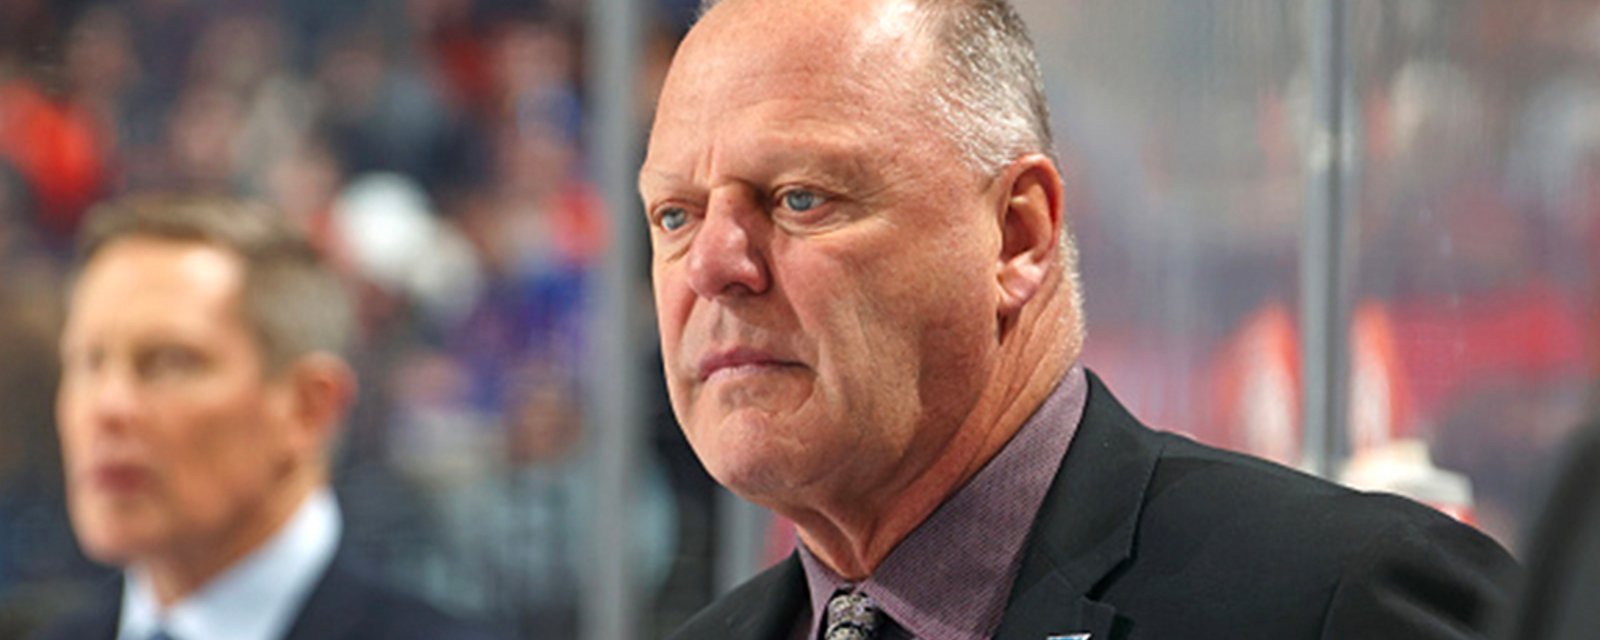 Darren Dreger reports on Gerard Gallant's potential new coaching job in the NHL